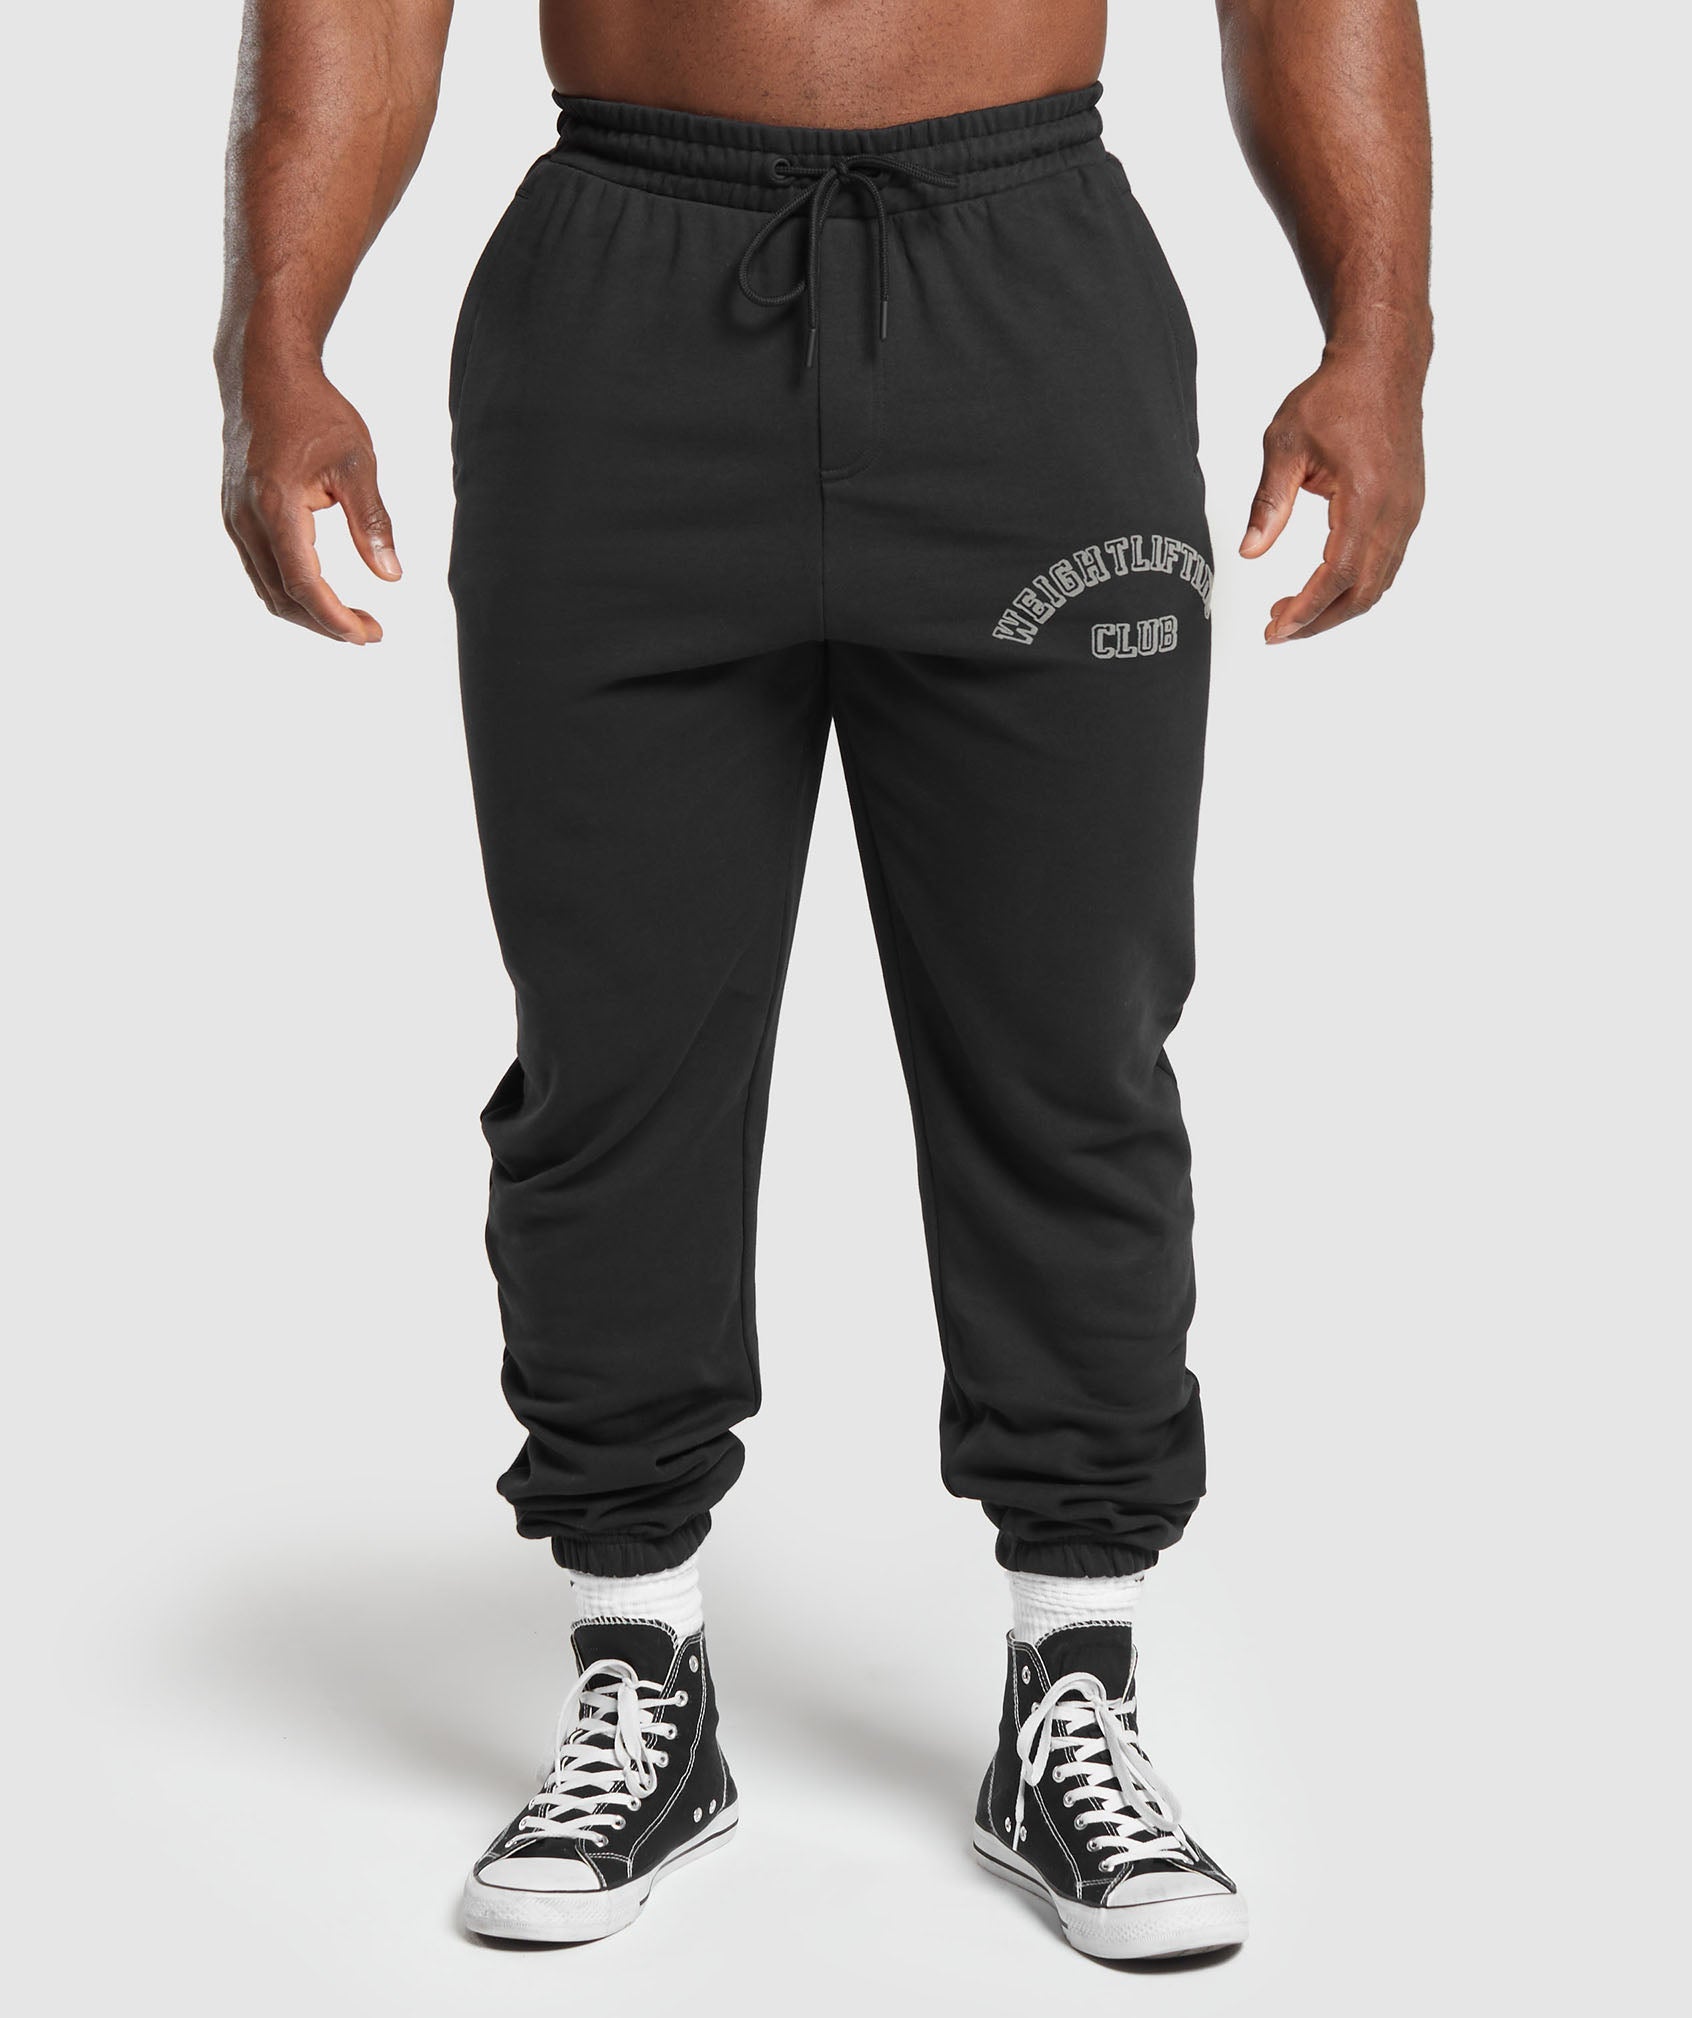 Weightlifting Club Joggers in Black - view 1